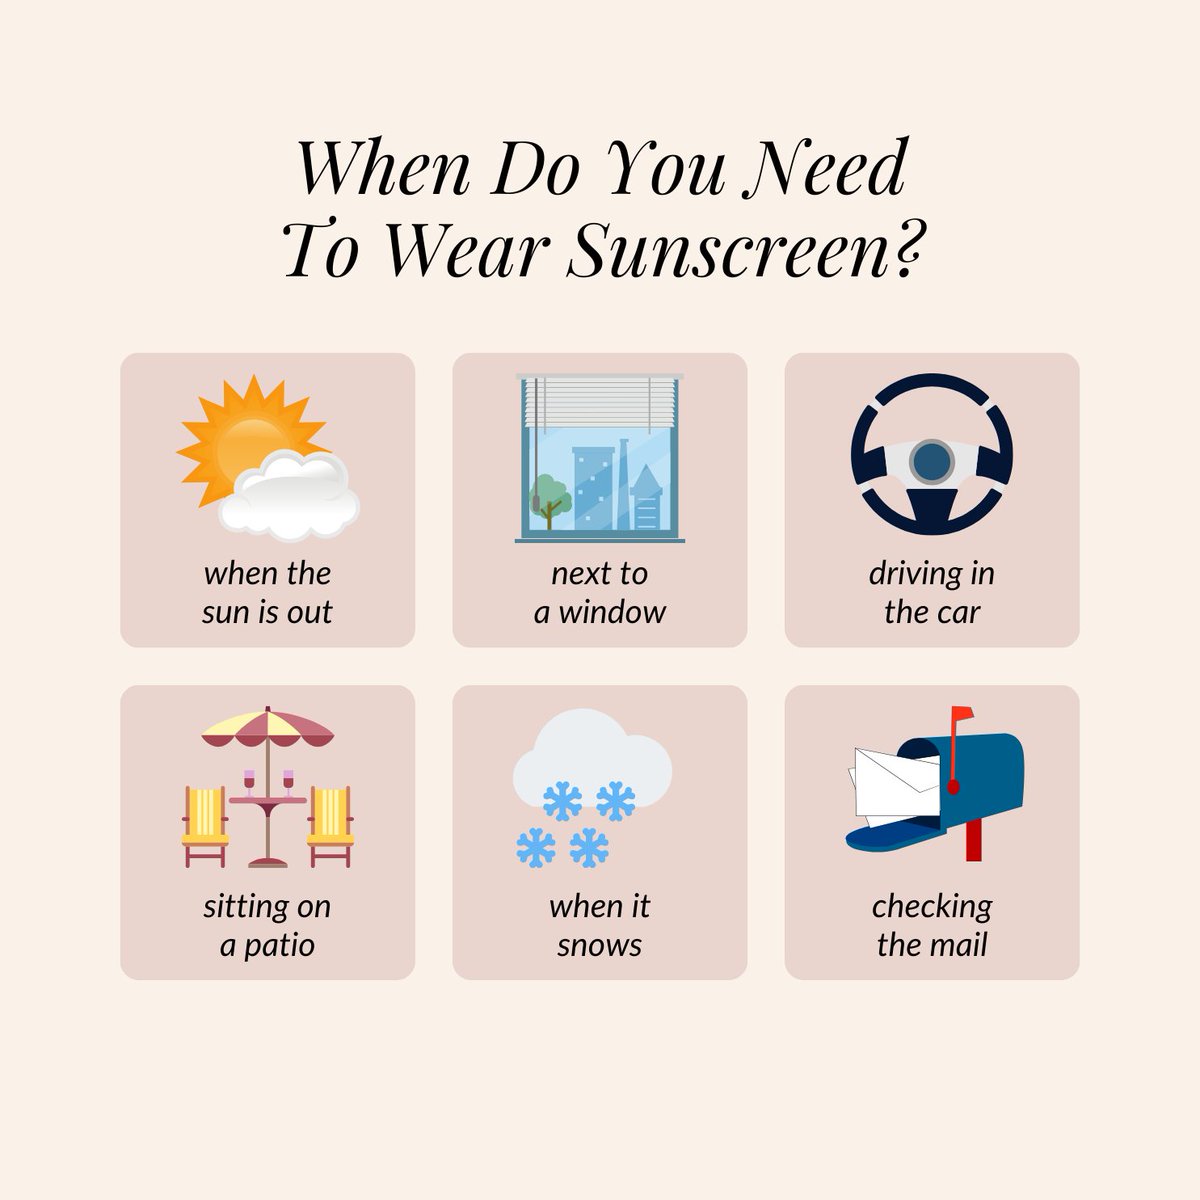 You may know you need to wear sunscreen but do you know sunscreen is for more than just a sun filled day outside? #WyomingcancerCoalition #Skincancerawarenessmonth #safetyfirst #uvprotection #timingiseverything